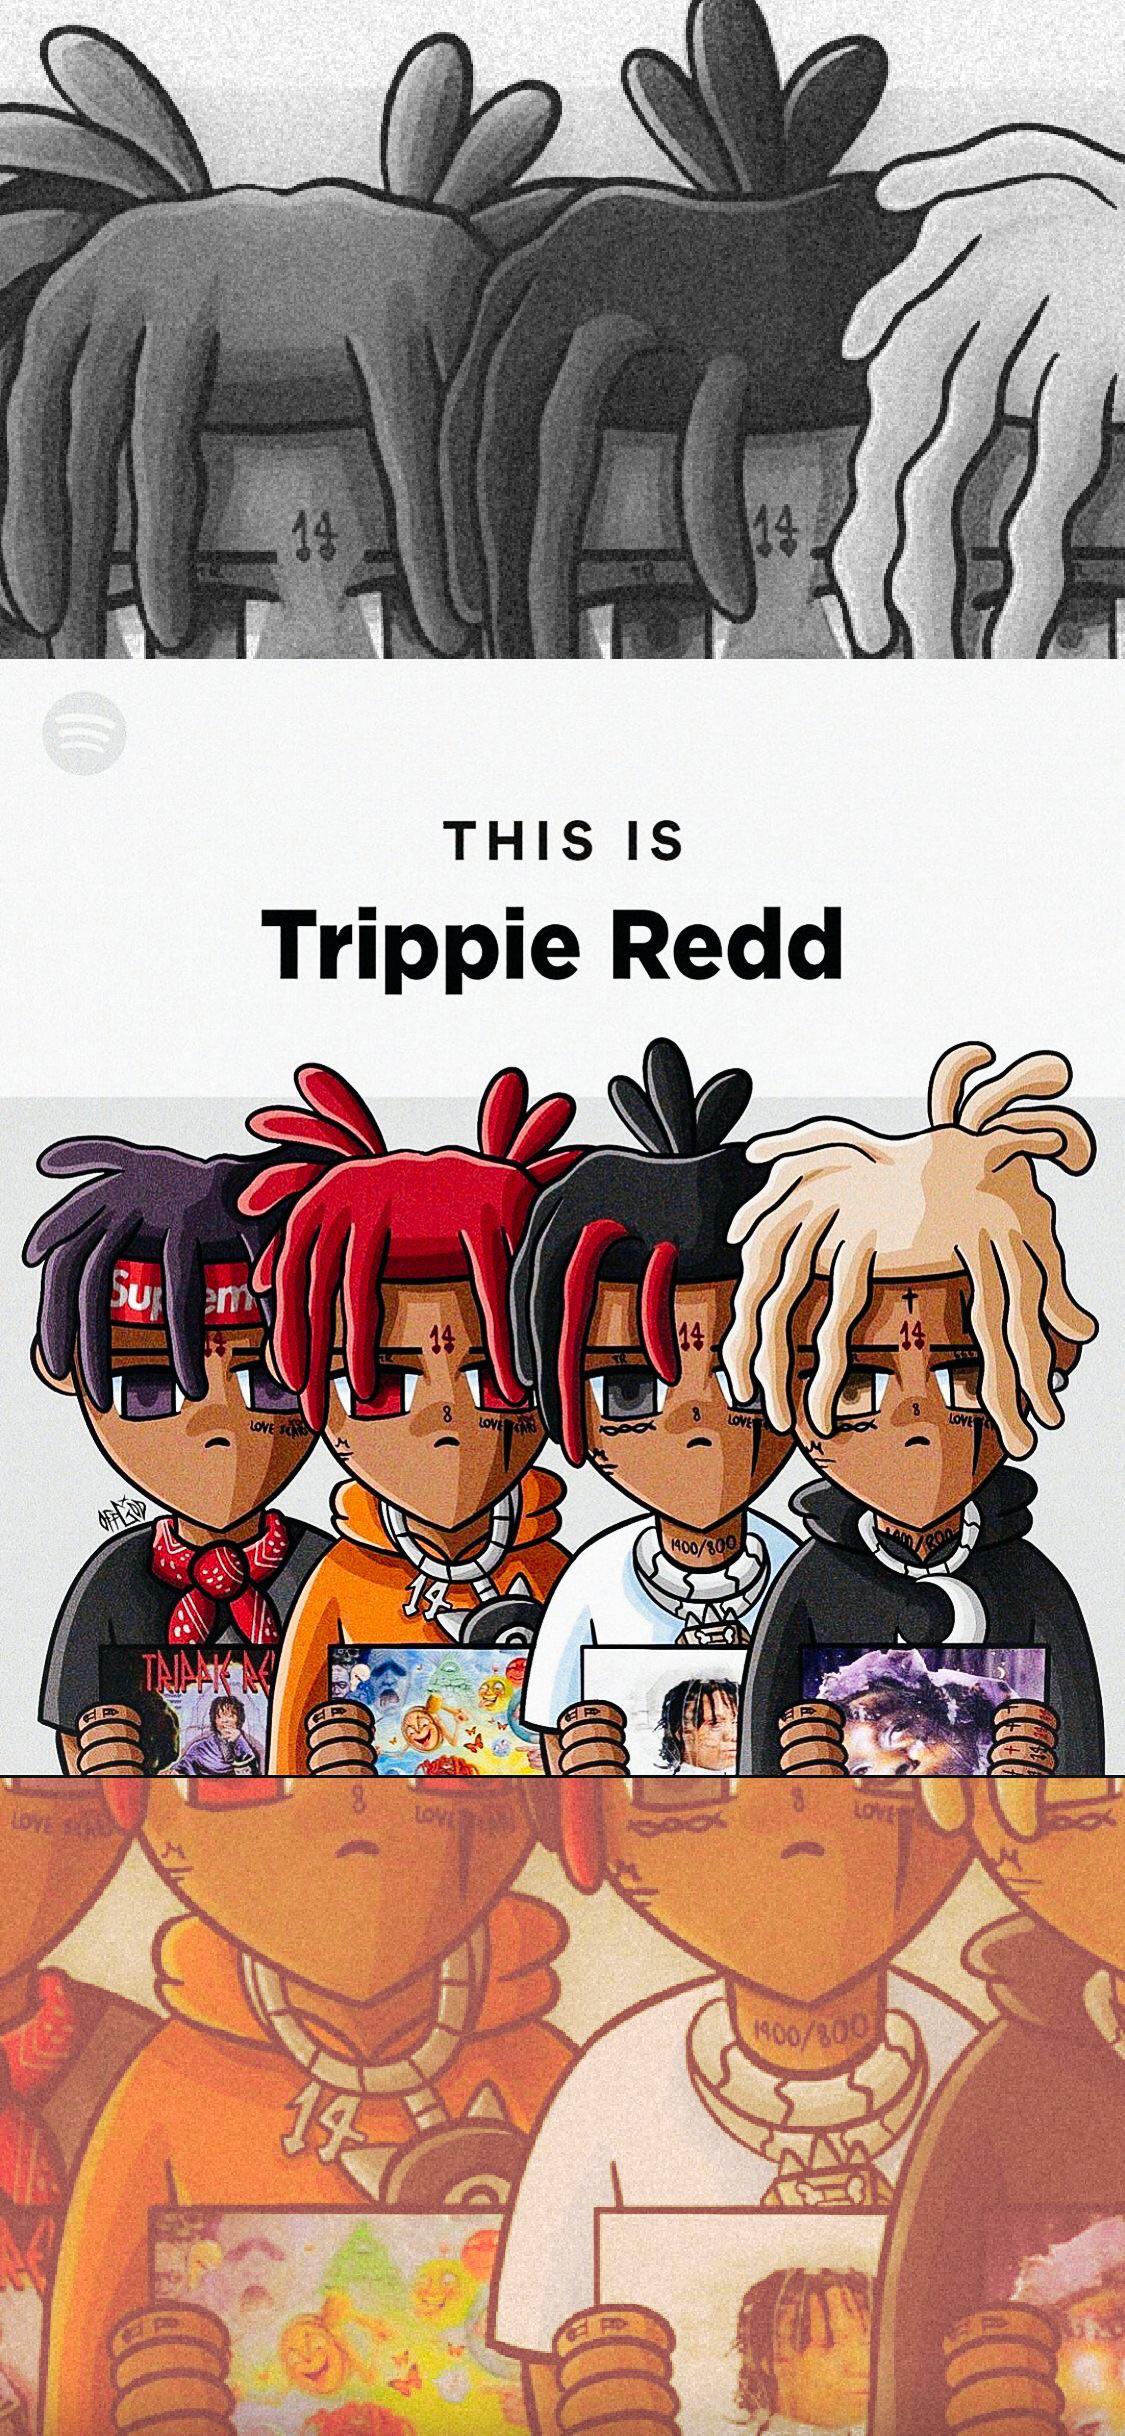 Made a wallpaper from this trippie redd visual